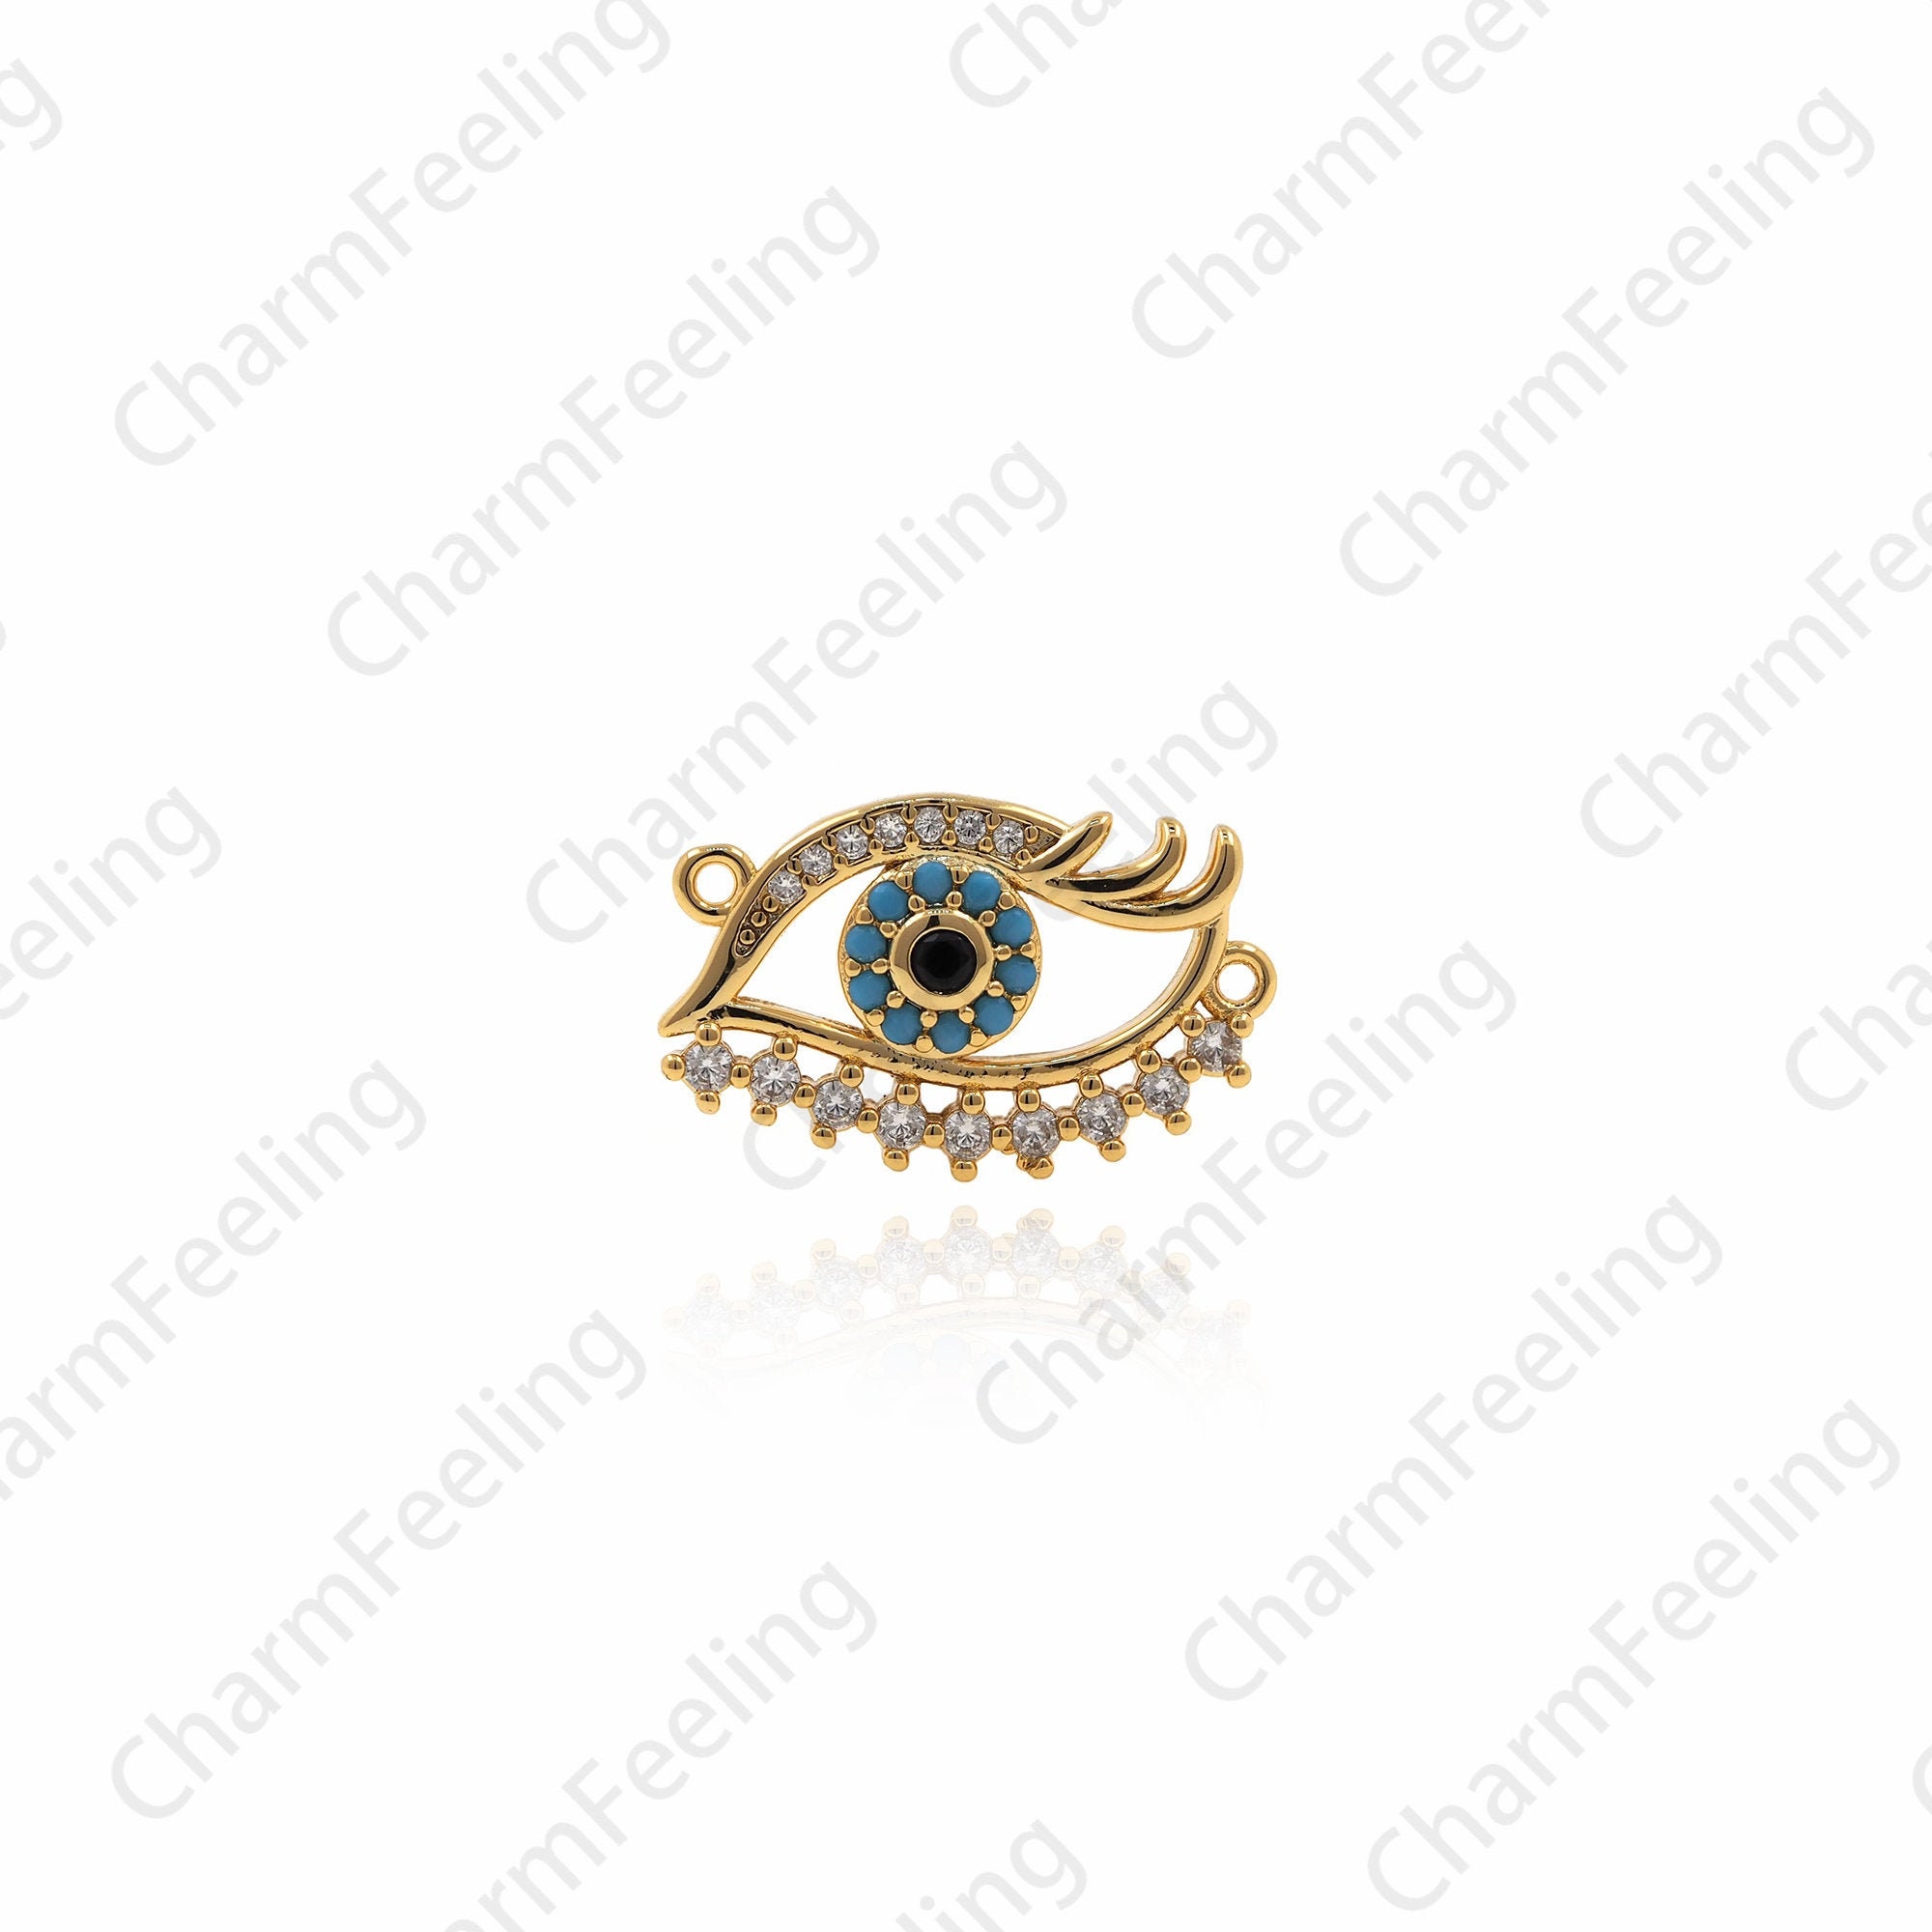 18K Gold Filled Beautiful Eye Necklace, Beautiful Eyes, Lucky Necklace, Eye Charm, Eye Pendant, Diy Jewelry Accessories 11.5x18x2.5mm